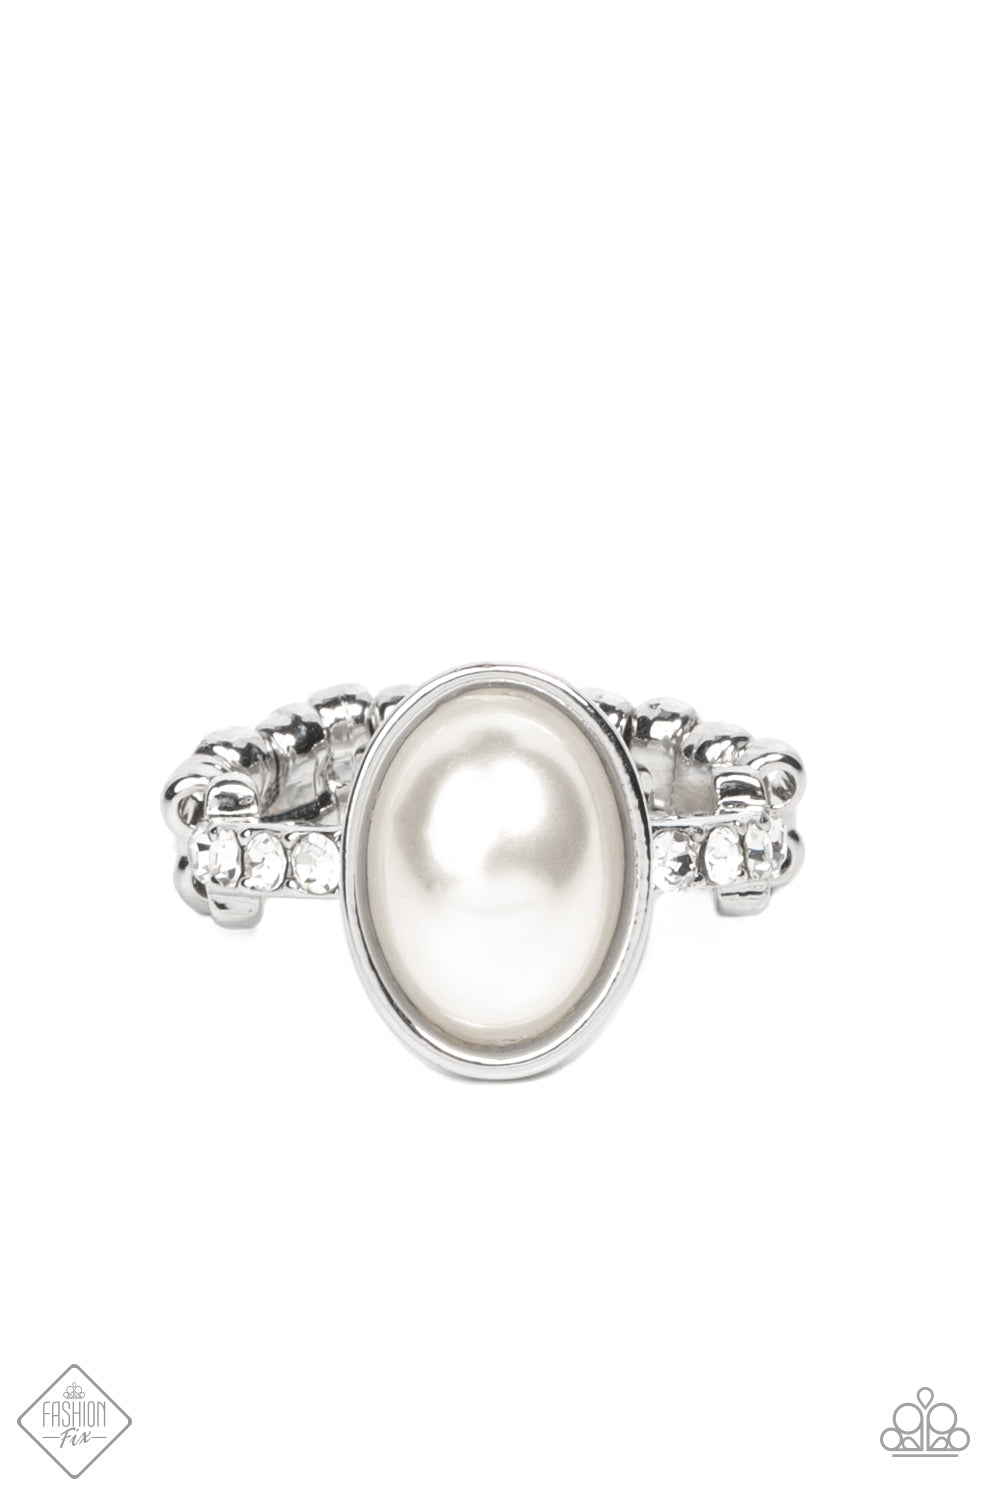 One Day at a SHOWTIME - White Pearl Ring - Paparazzi Accessories